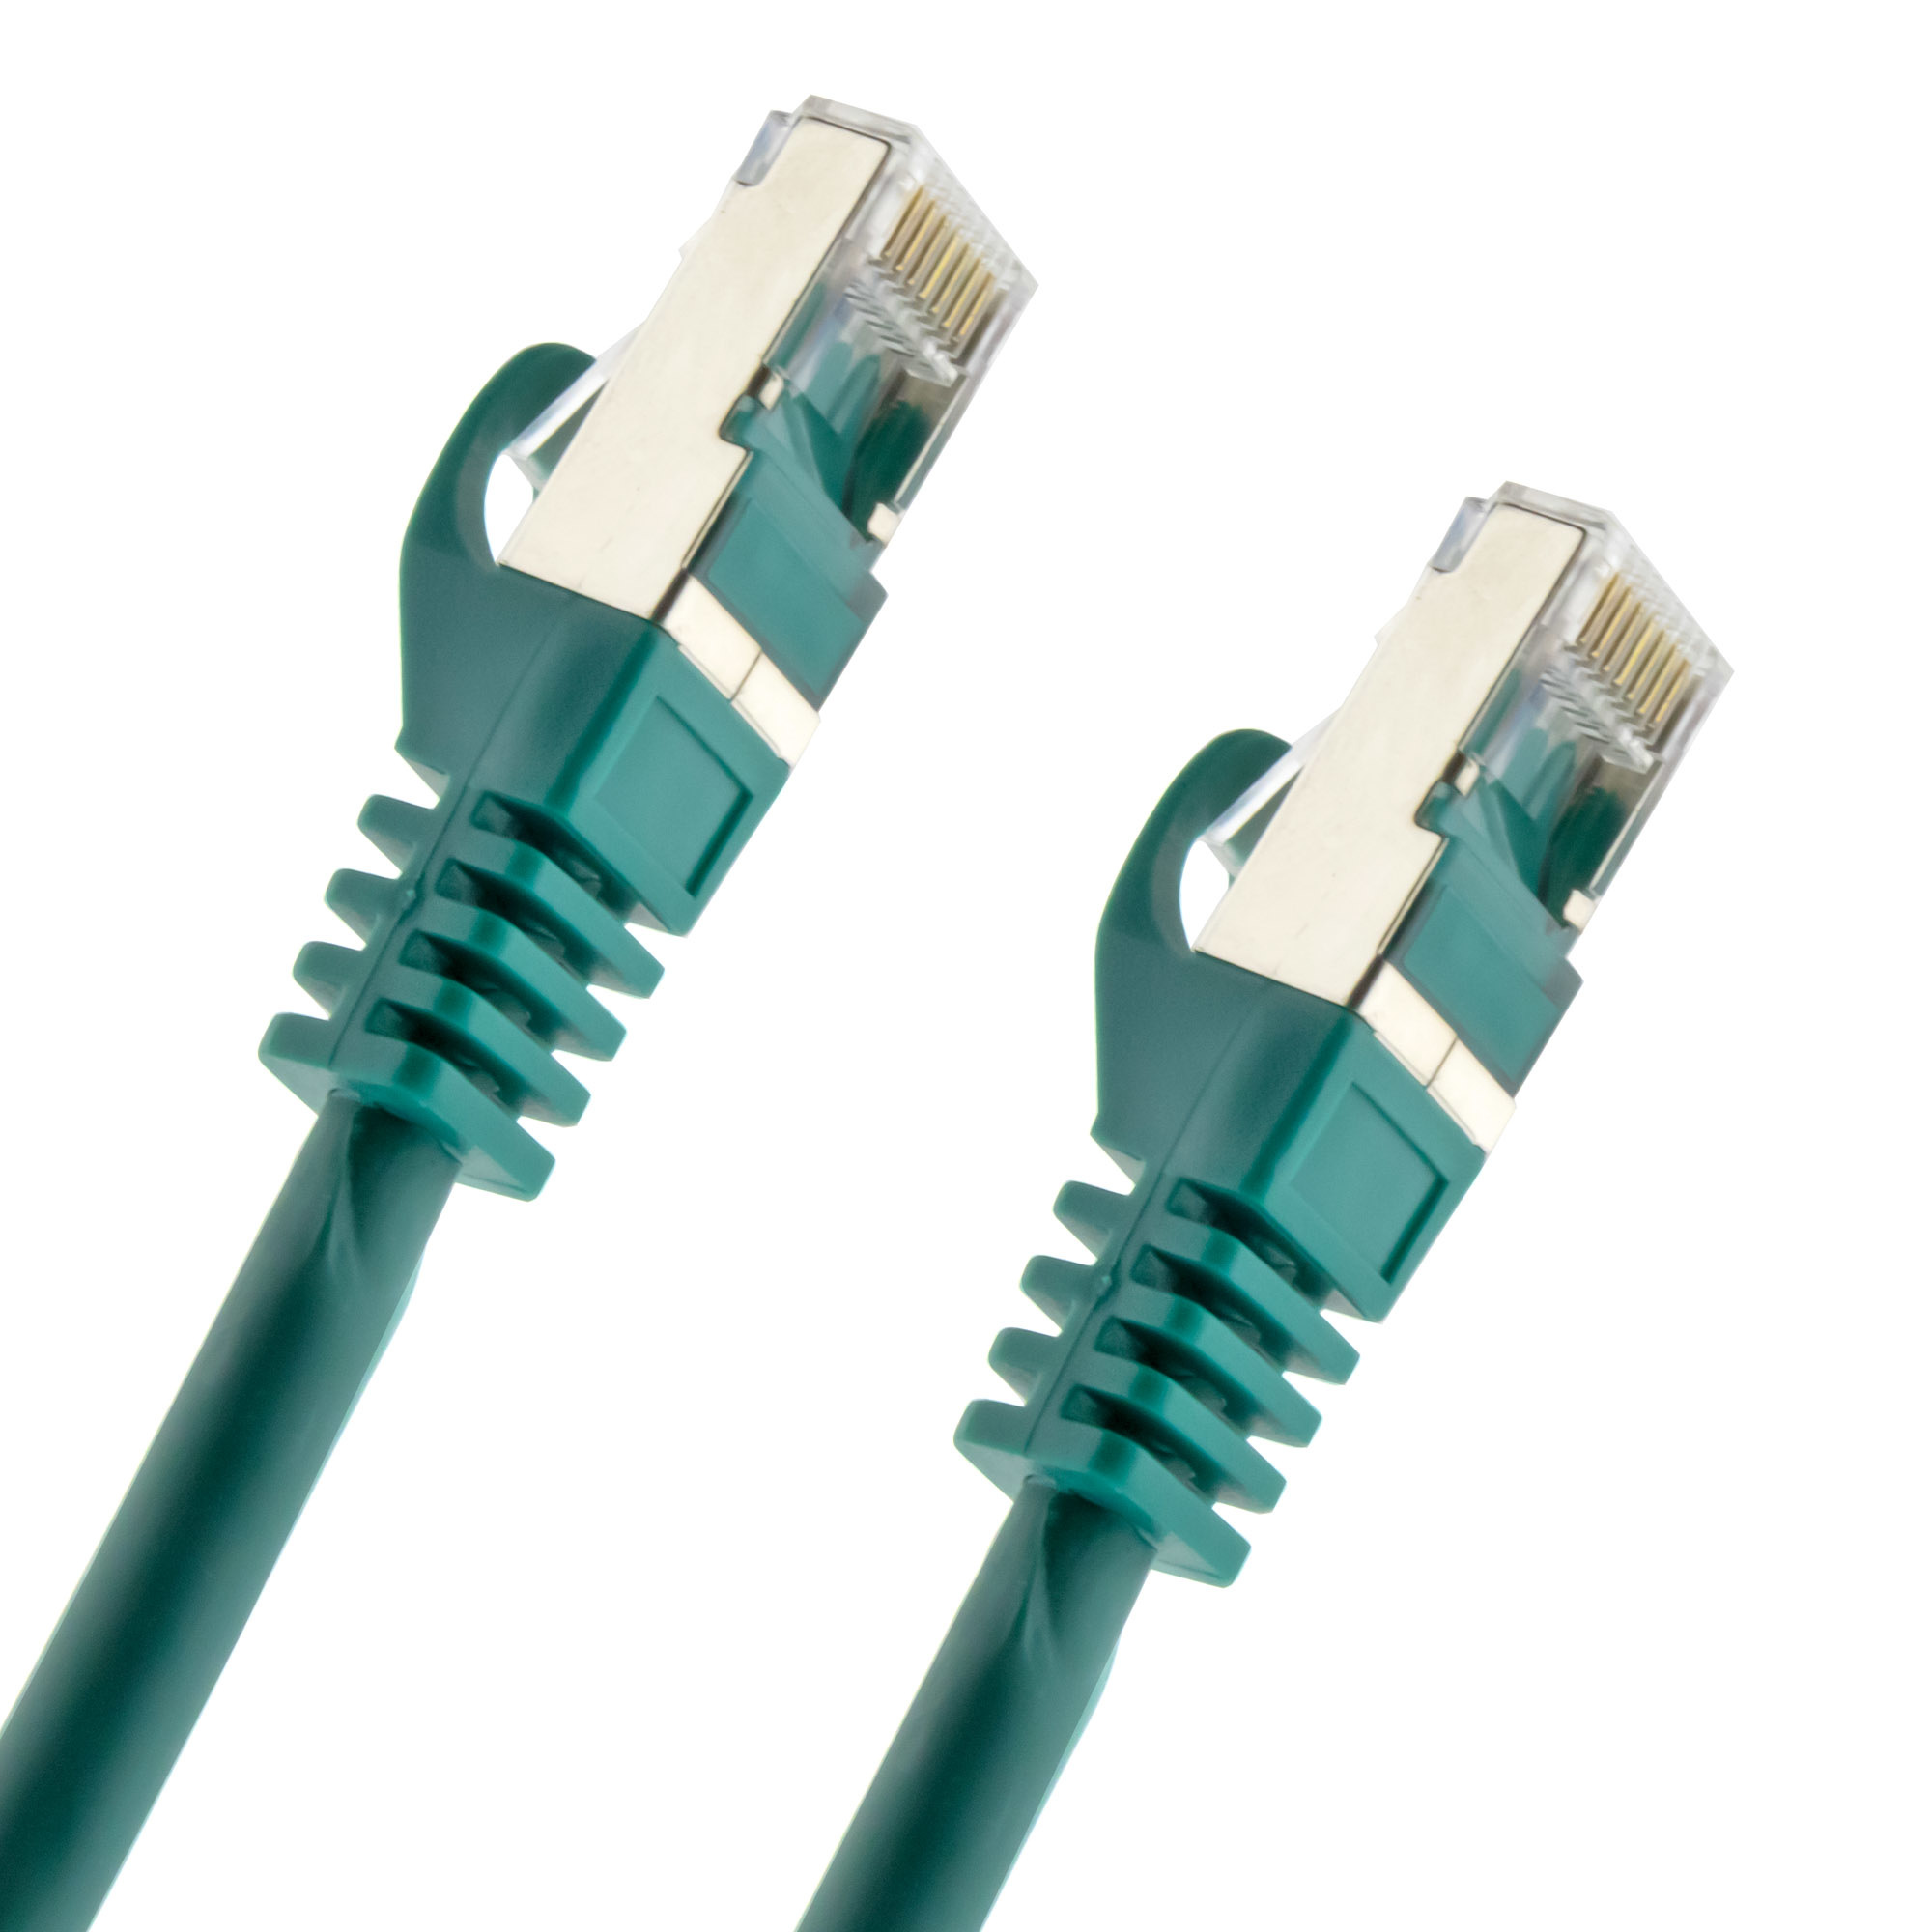 Network cable Cat. 7 S/FTP PIMF 10 meter green